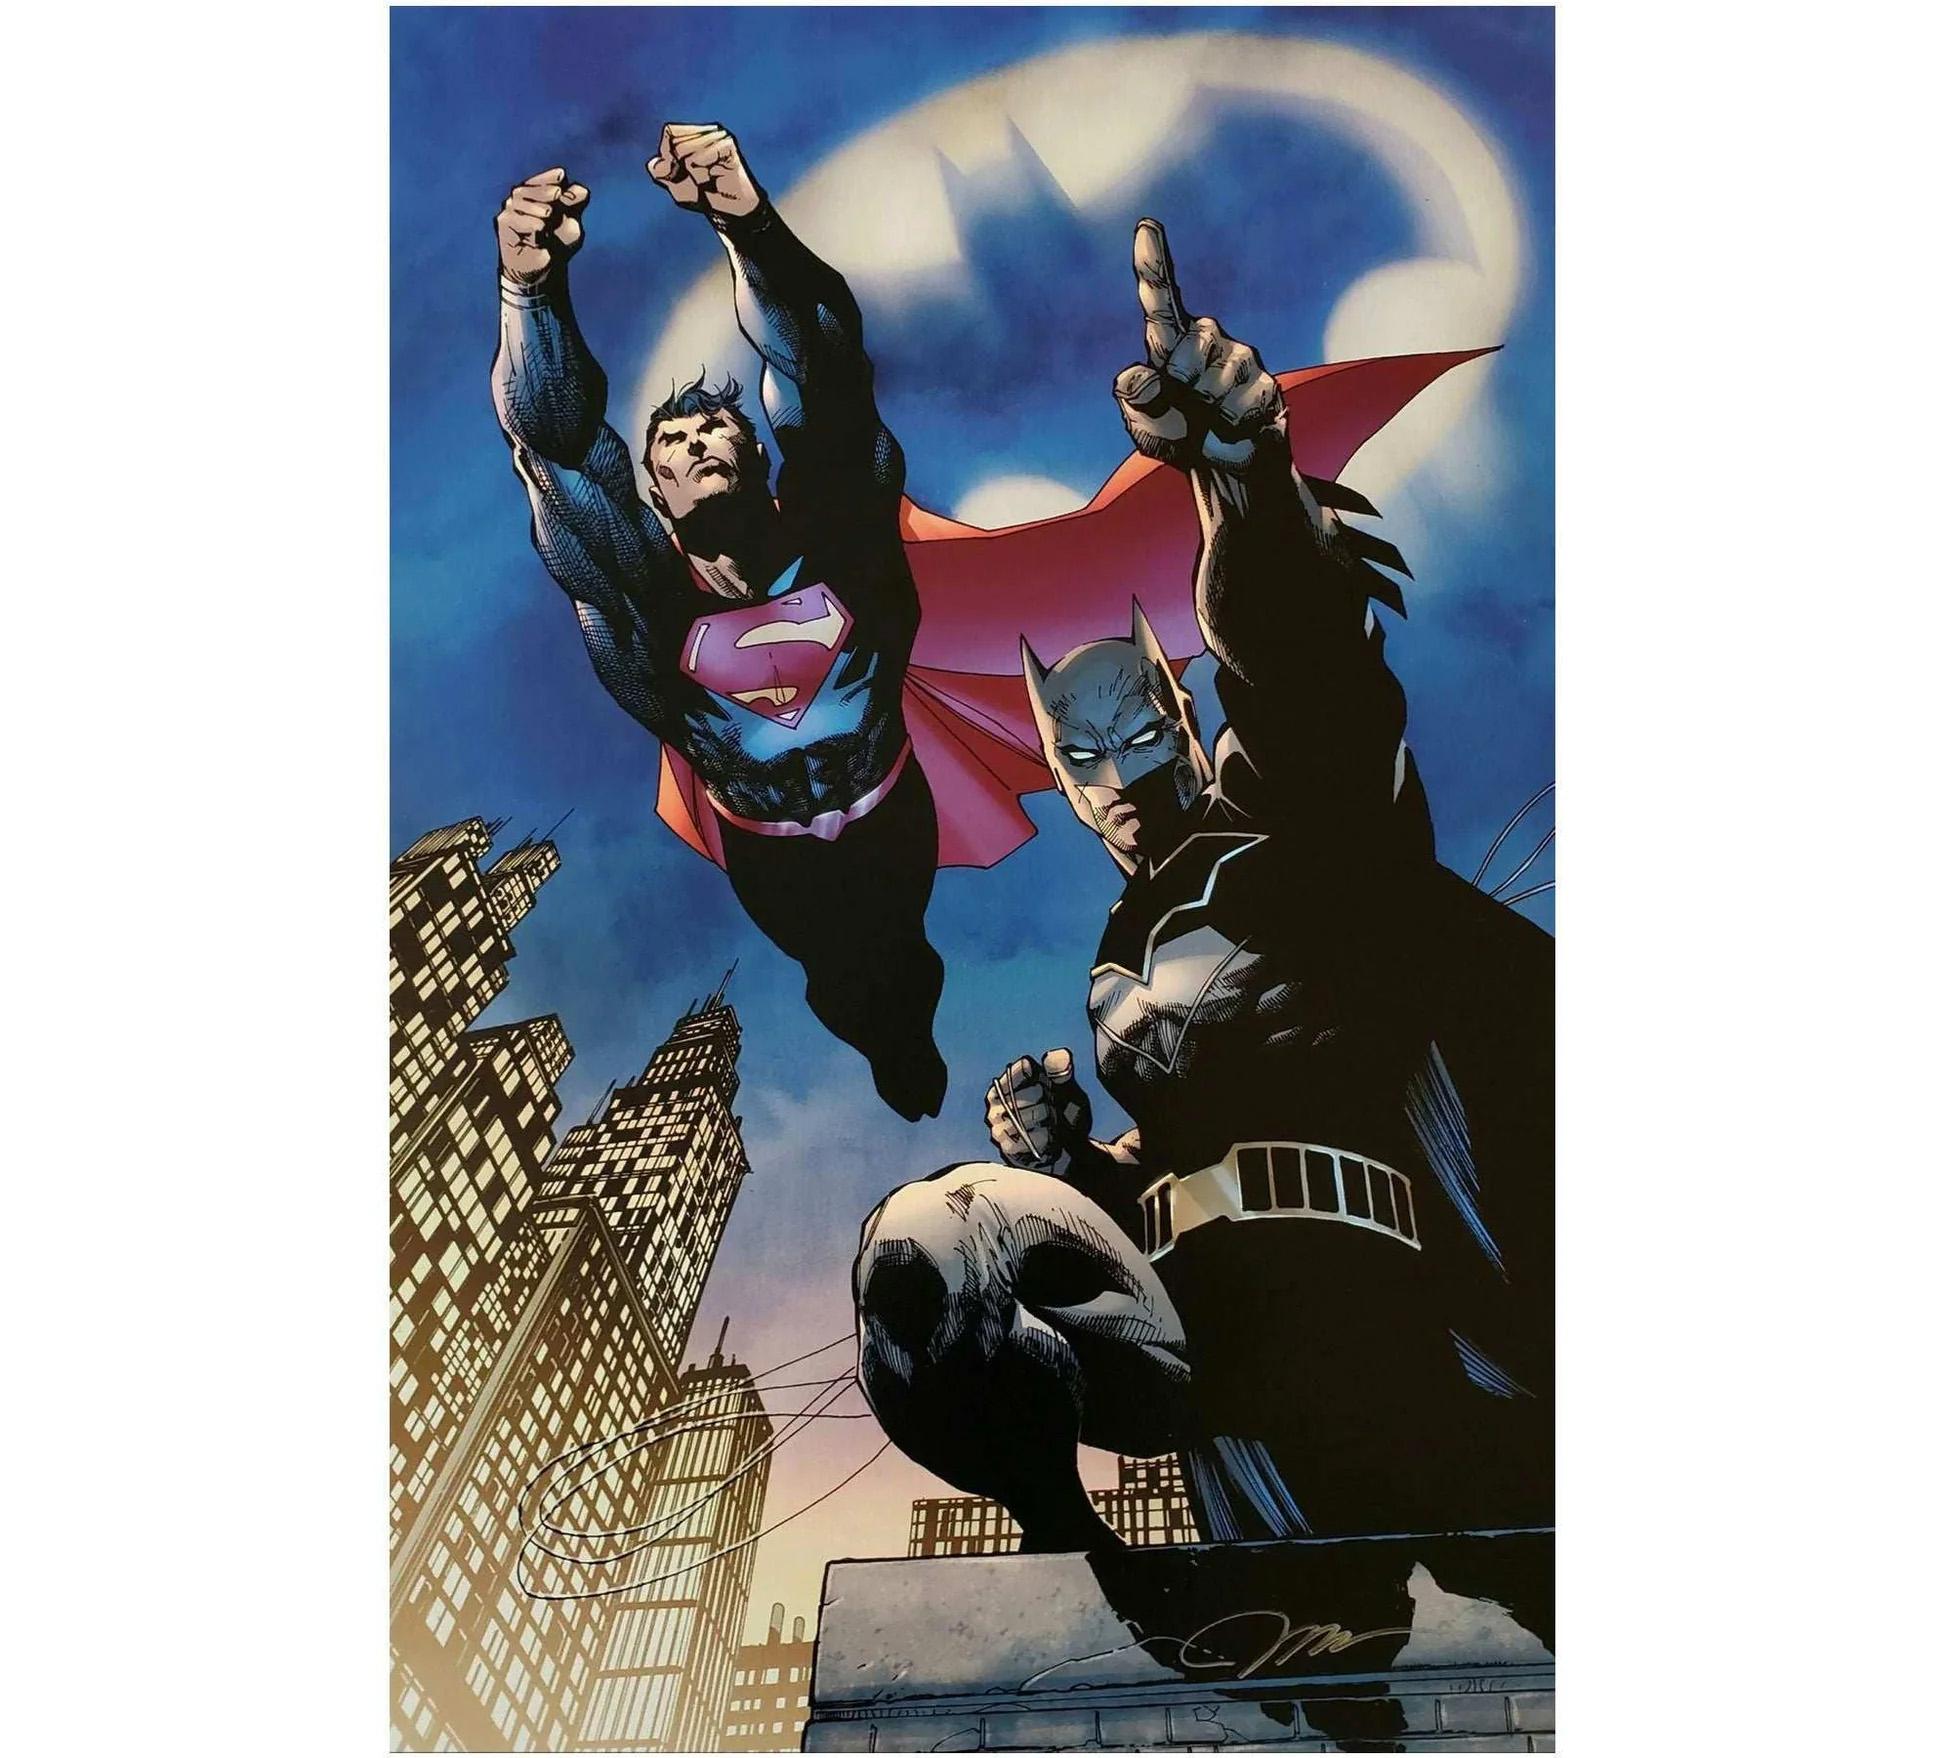 MEDIUM: Gicleé on Canvas
EDITION SIZE: 100
SIZE: 26″ x 17.5″
ARTIST:  Jim Lee
SKU: CP1597D

The original art for “Heroes Unite” was created for DC Comics' Batman #45. This image was issued as a variant cover to commemorate 80 continuous years of